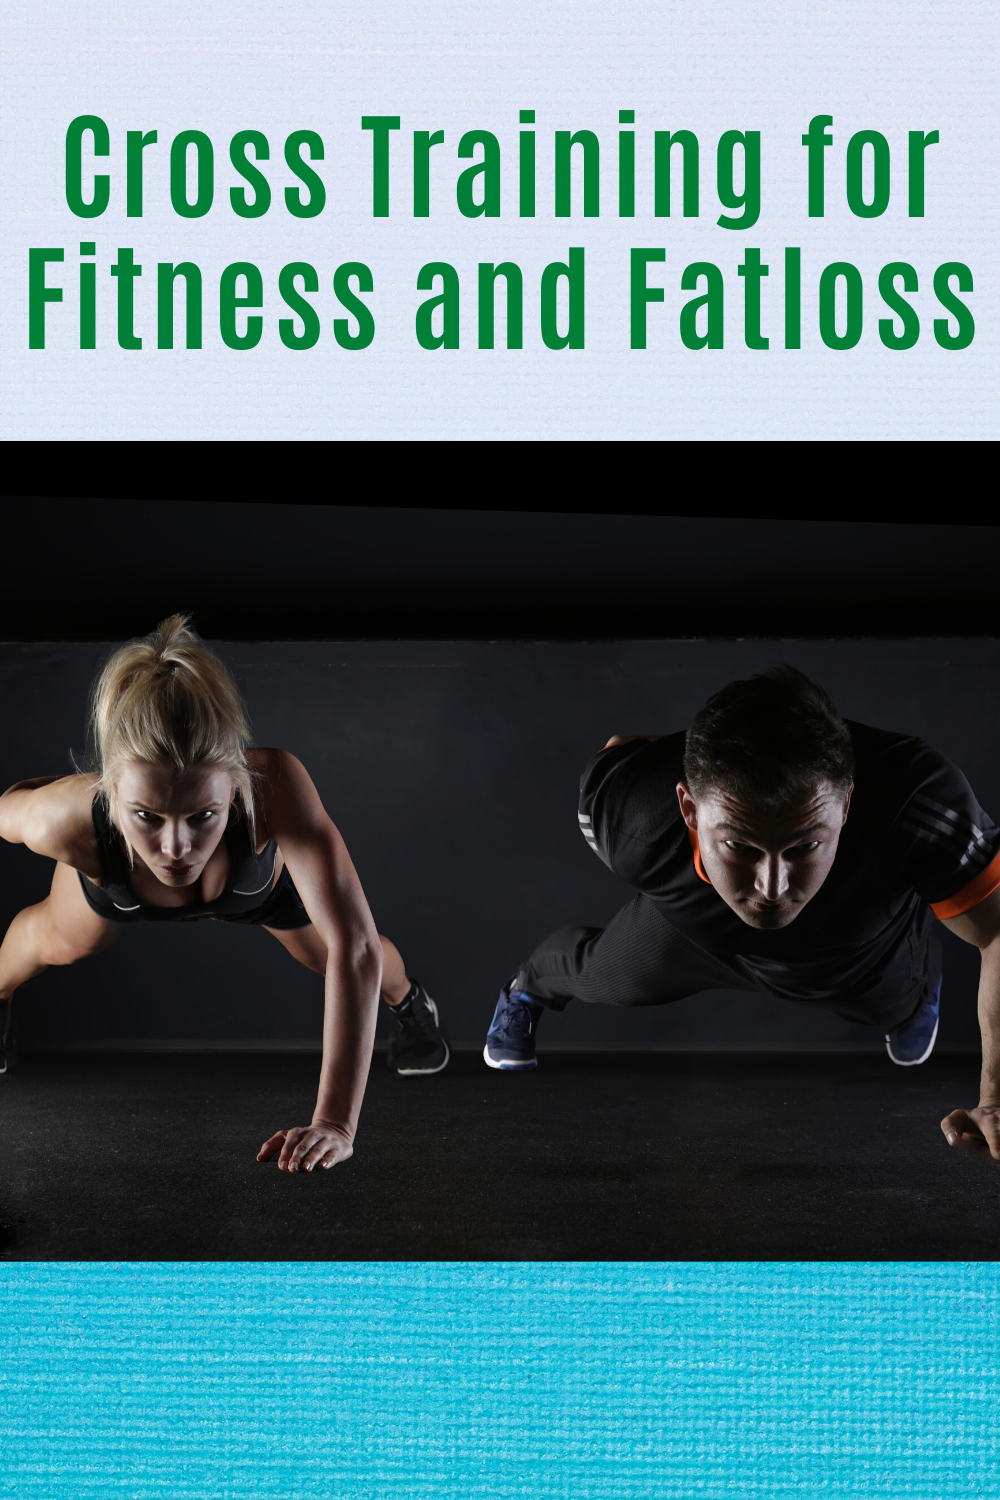 Cross Training for Fitness and Fatloss